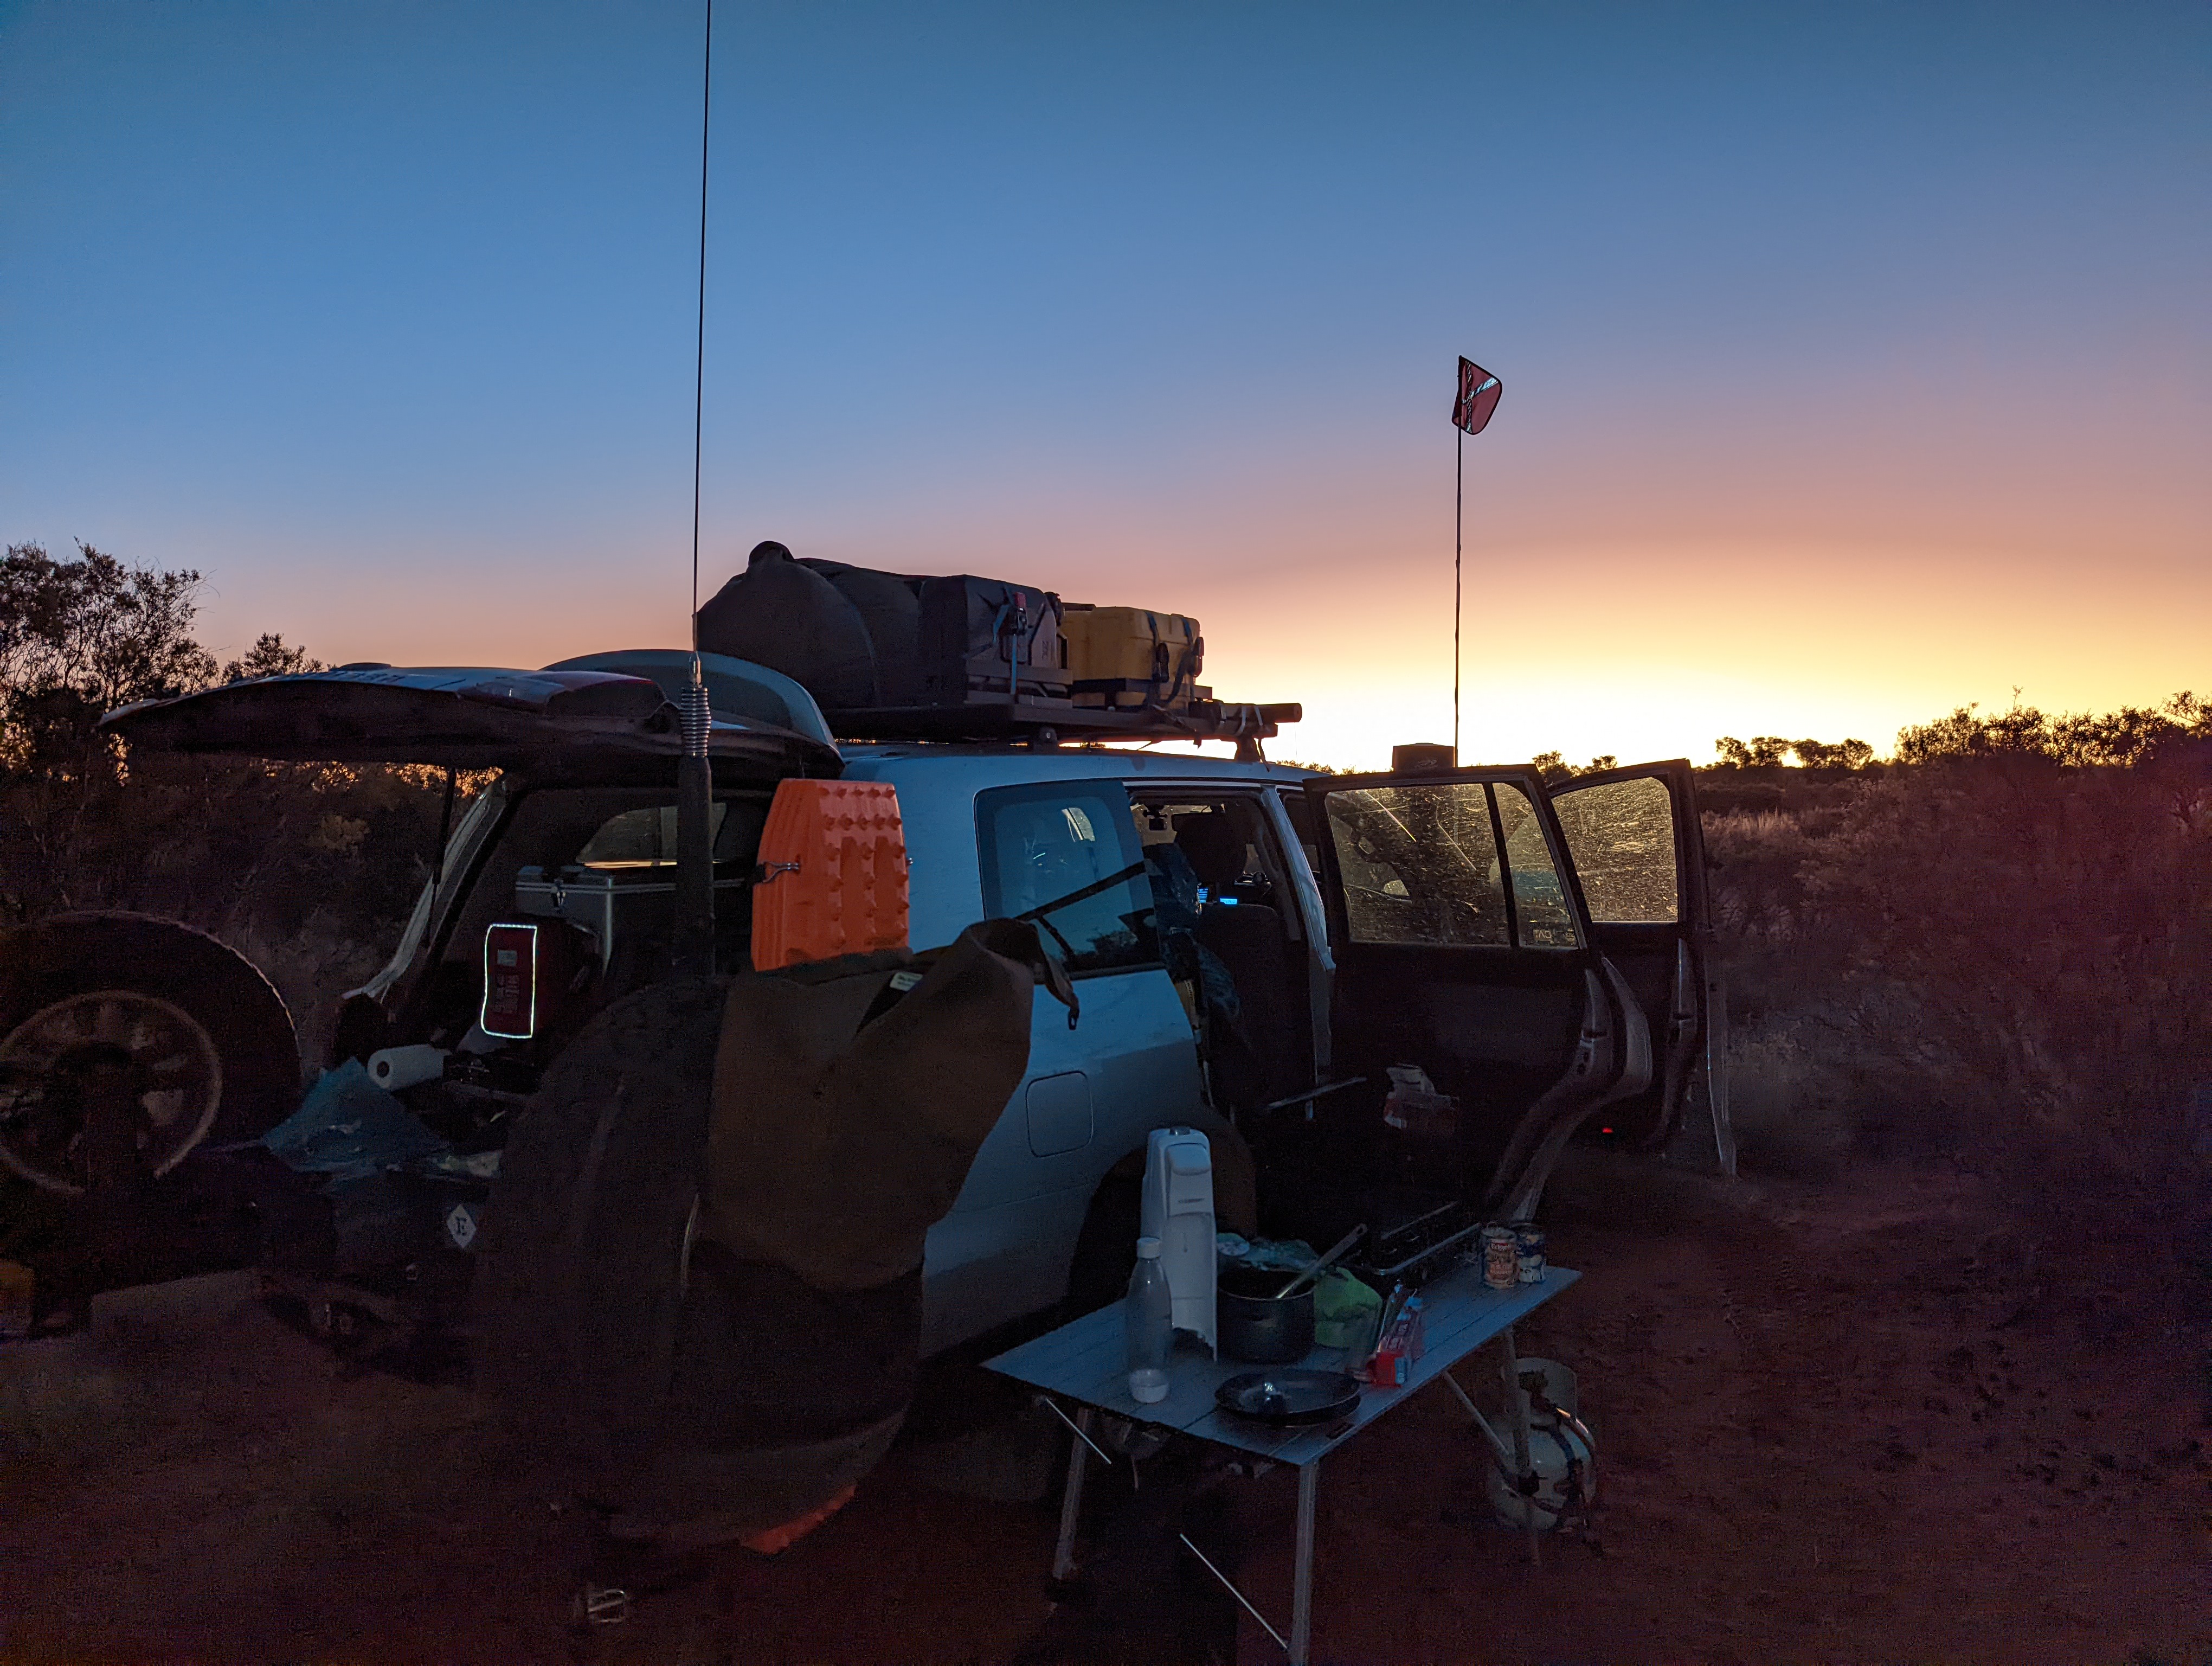 Our car and camp equipment in front of a sunset